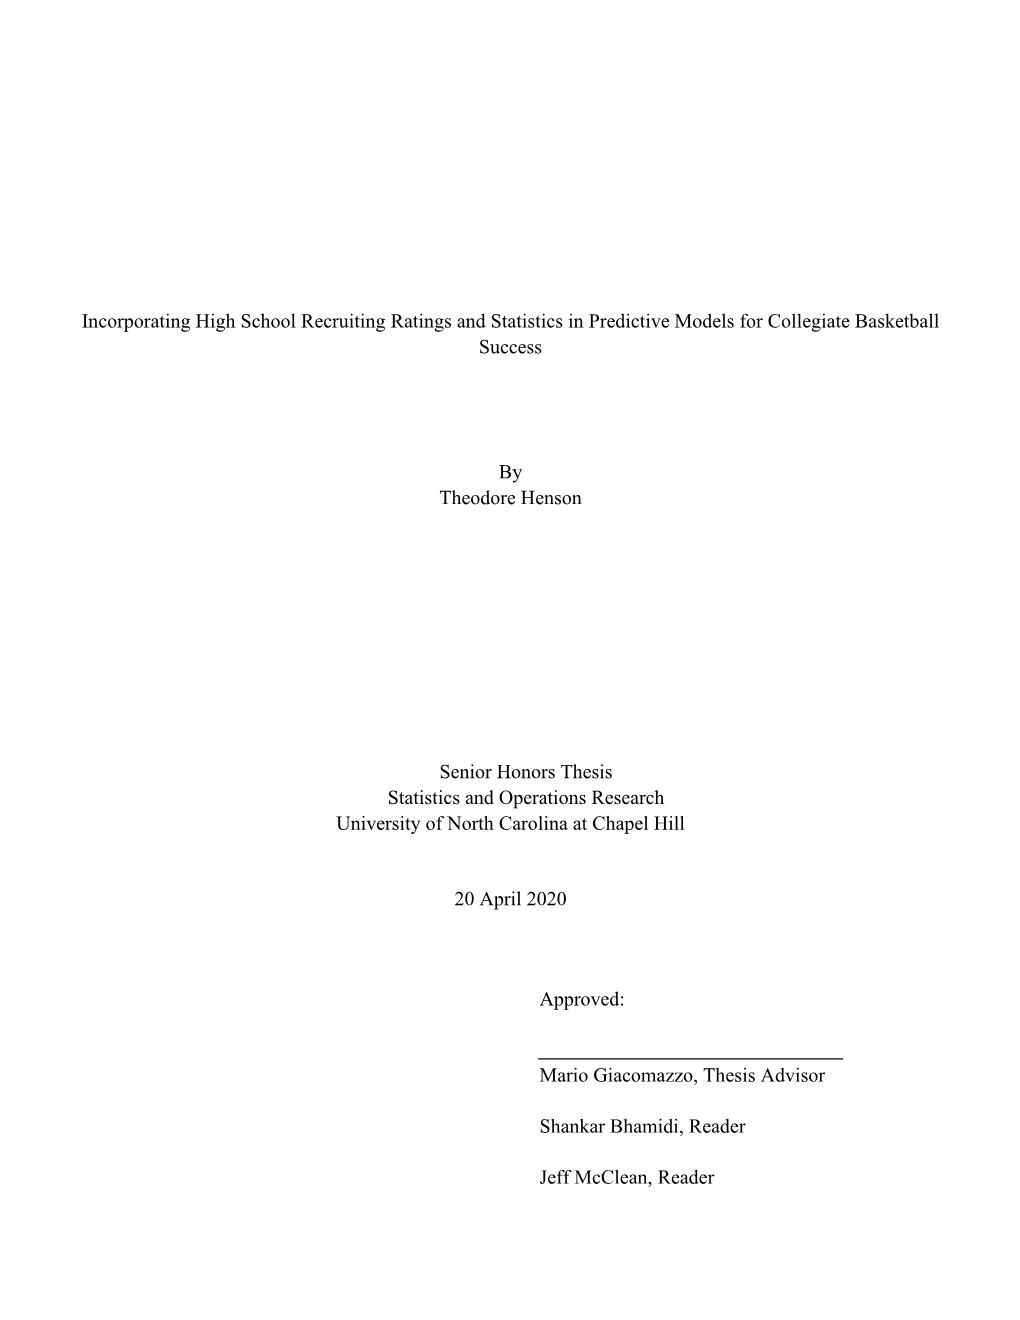 Incorporating High School Recruiting Ratings and Statistics in Predictive Models for Collegiate Basketball Success